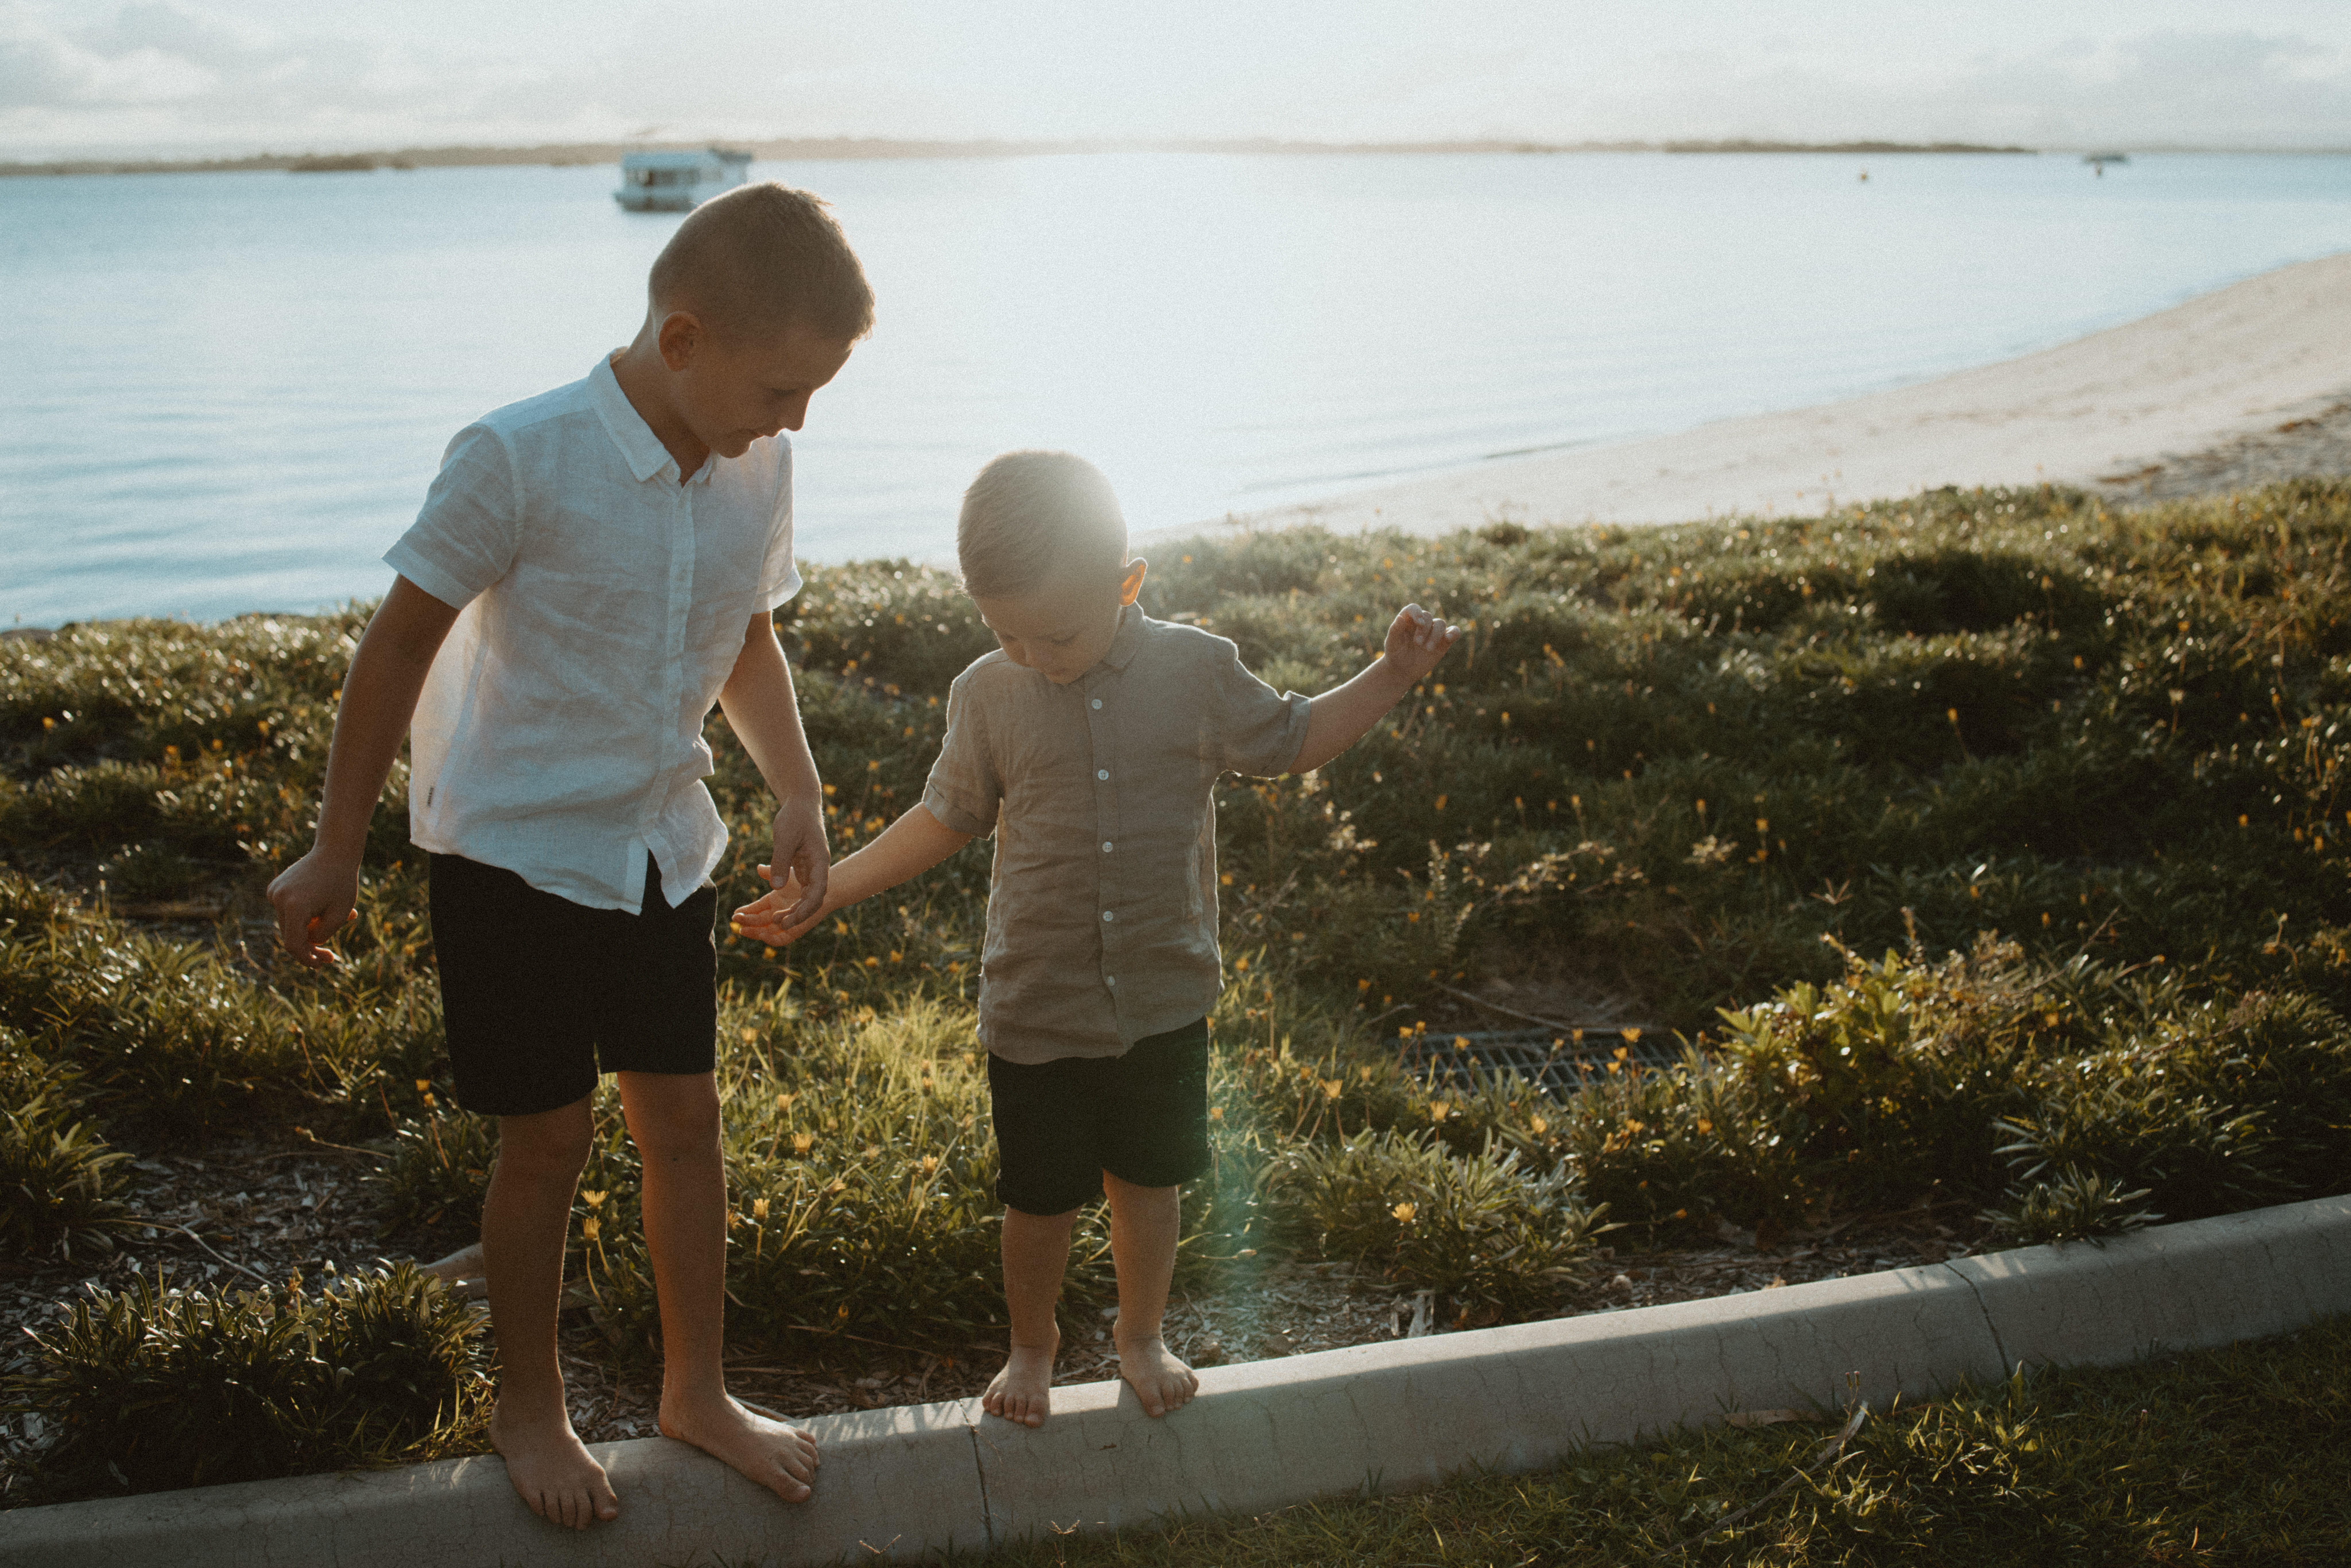 bribie island family session at sunset